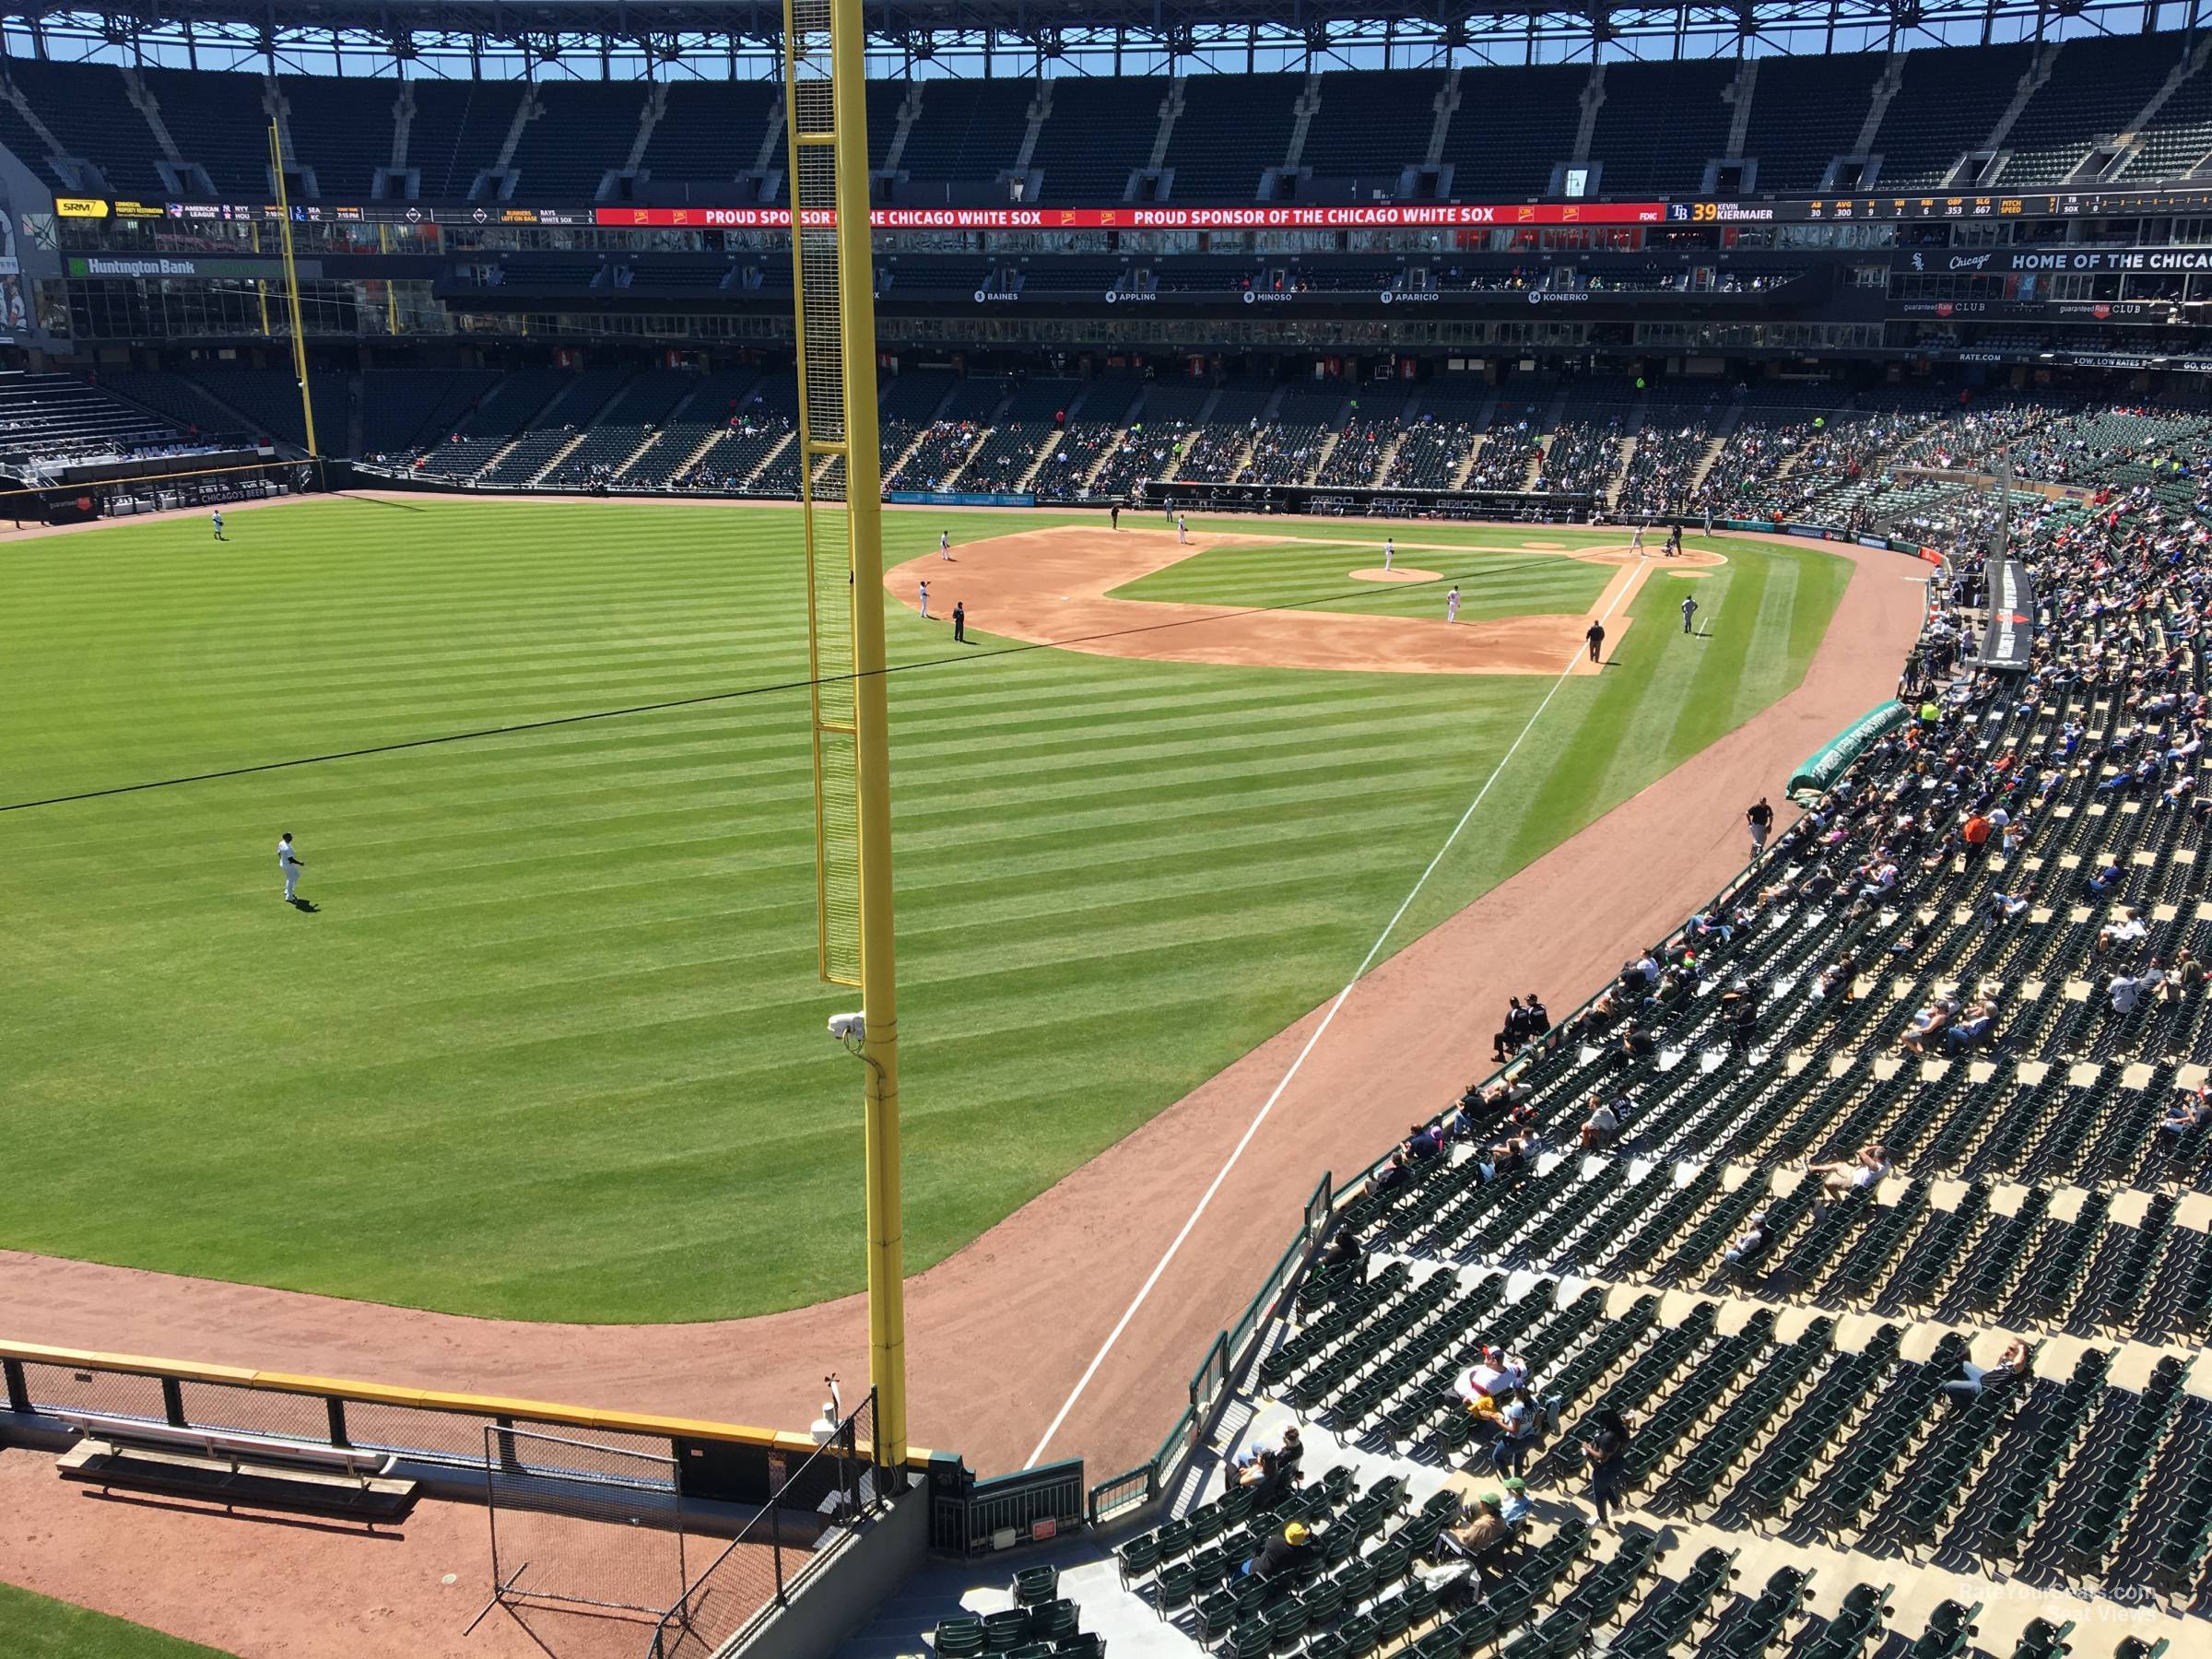 section 356, row 1 seat view  - guaranteed rate field